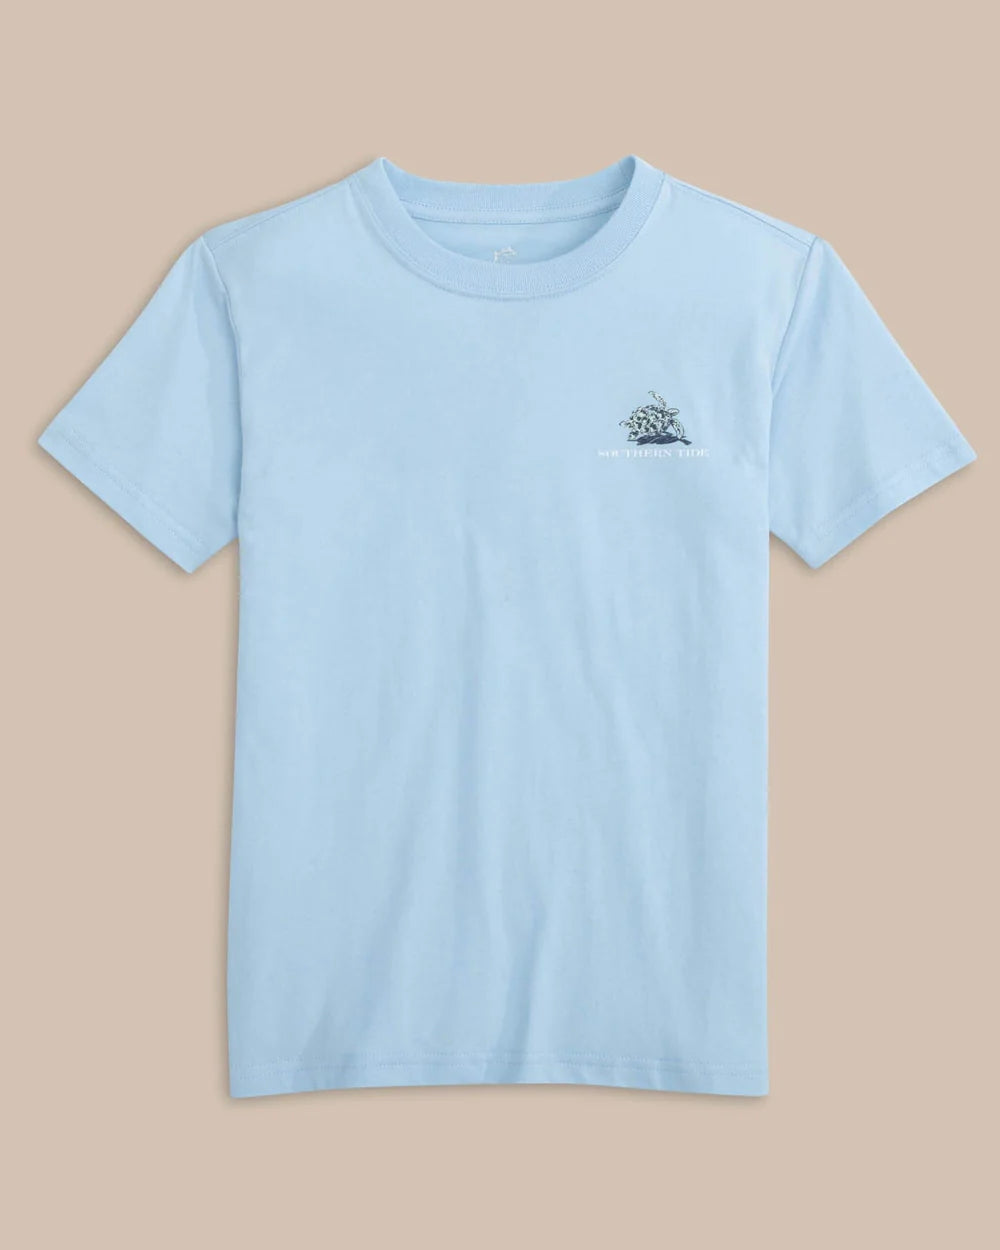 SOUTHERN TIDE Kid's Tees Southern Tide Kids Yachts of Turtles Short Sleeve T-Shirt || David's Clothing